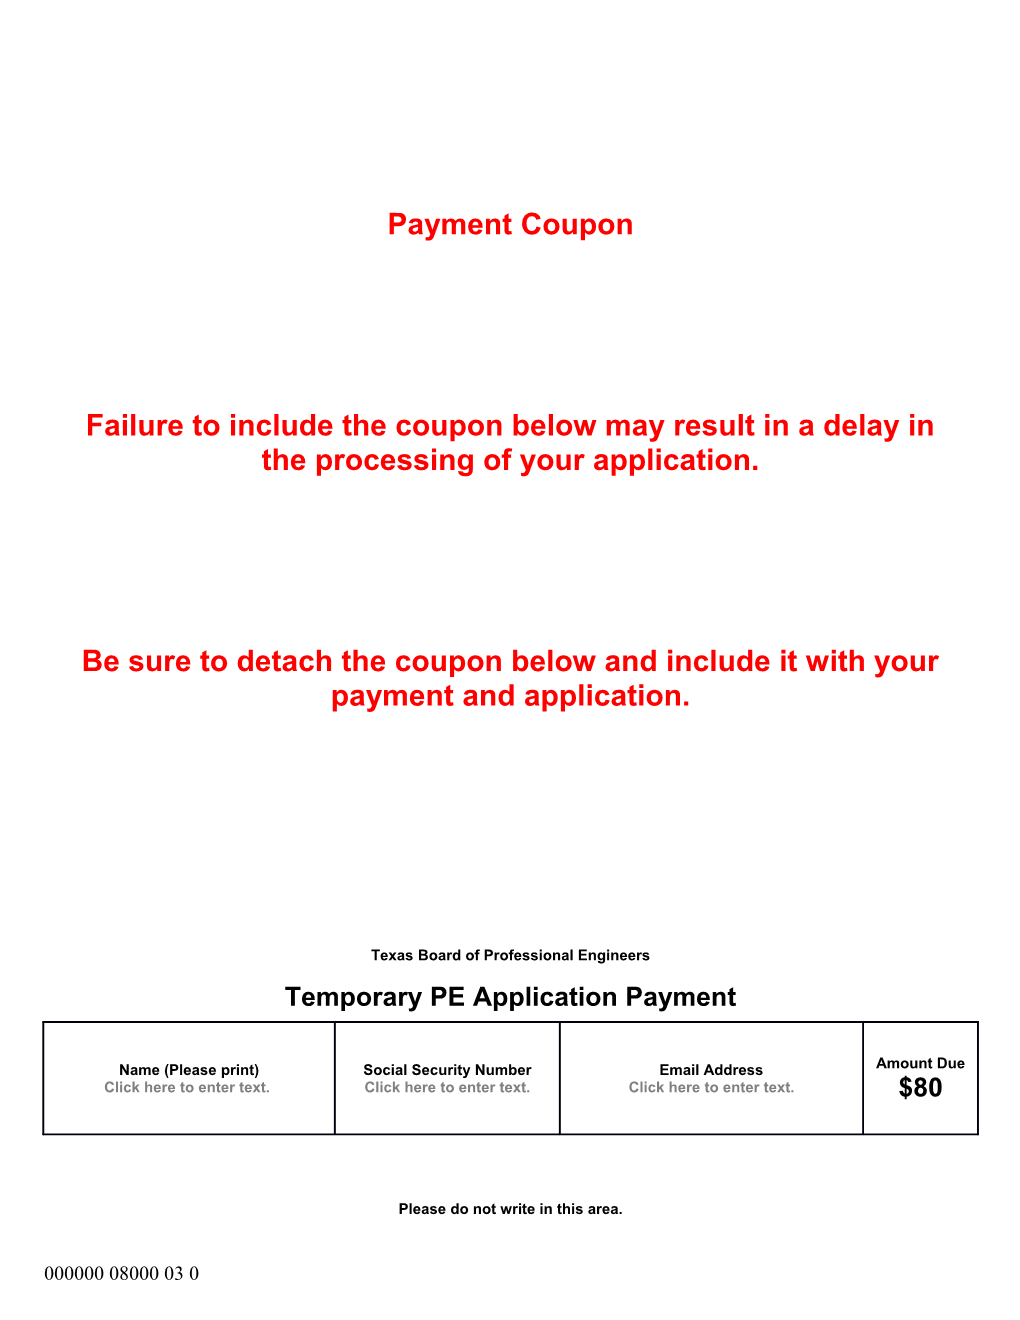 Be Sure to Detach the Coupon Below and Include It with Your Payment and Application